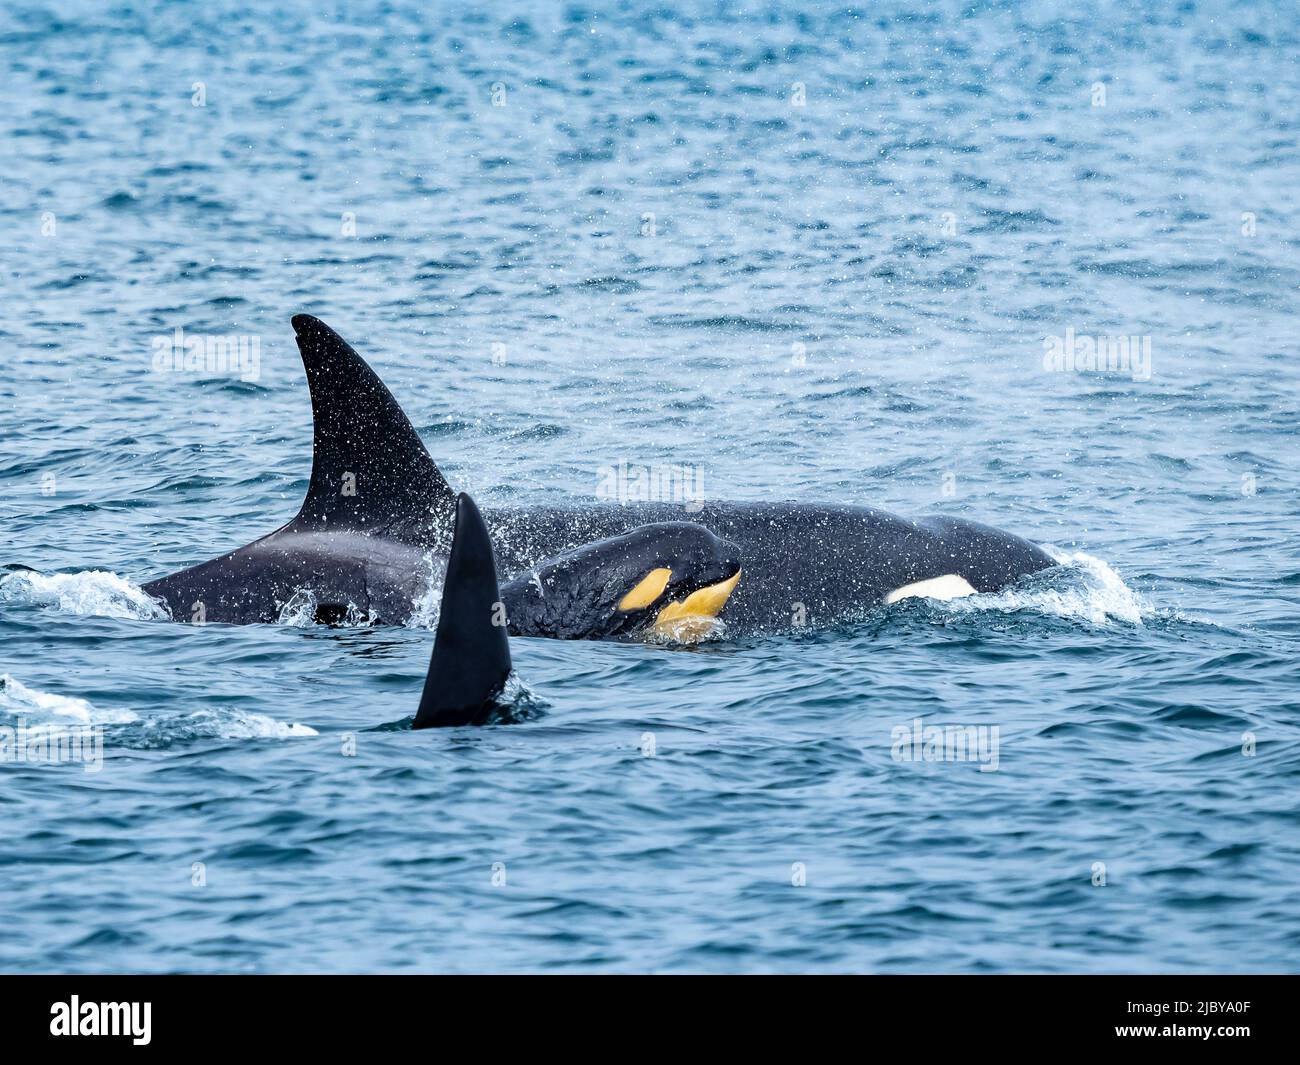 Young calf discolored by diatonsm Transiant Killer Whales (Orca orcinus) family pod in Monterey Bay, Monterey Bay National Marine Refuge, California Stock Photo